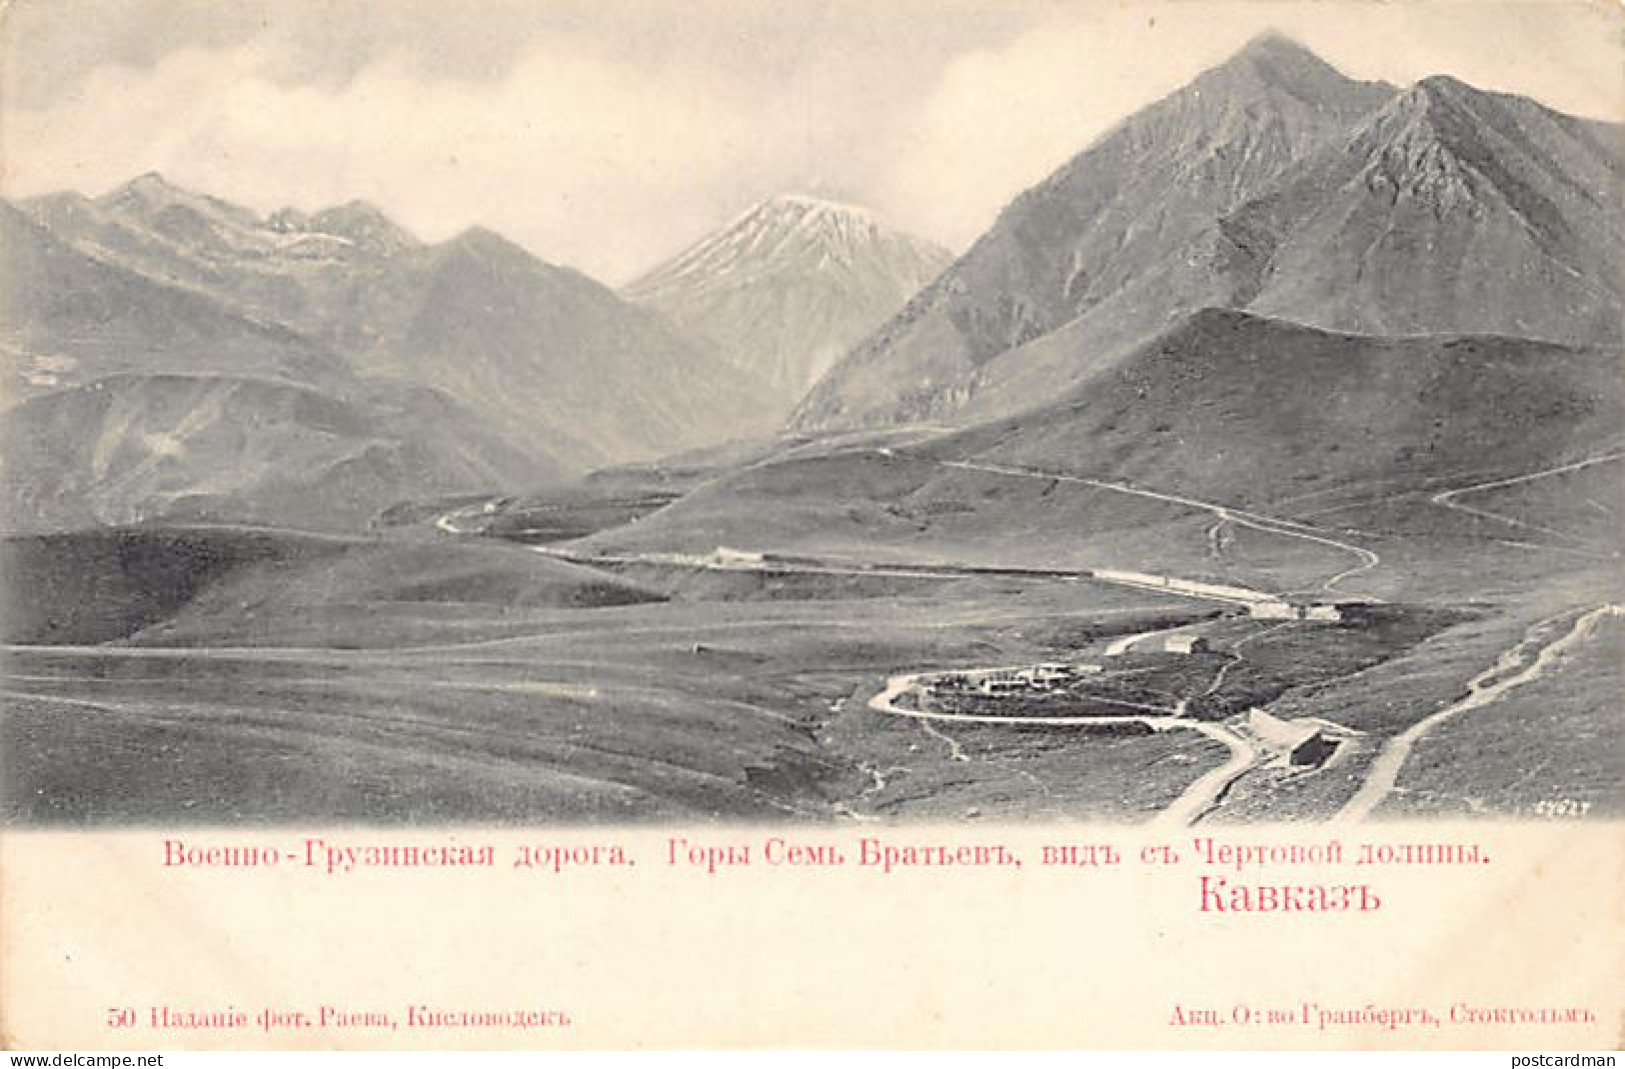 Russia - Georgian Military Road - Seven Brothers Mountain, View From The Devil's Valley - Publ. Raev 50 - Russland